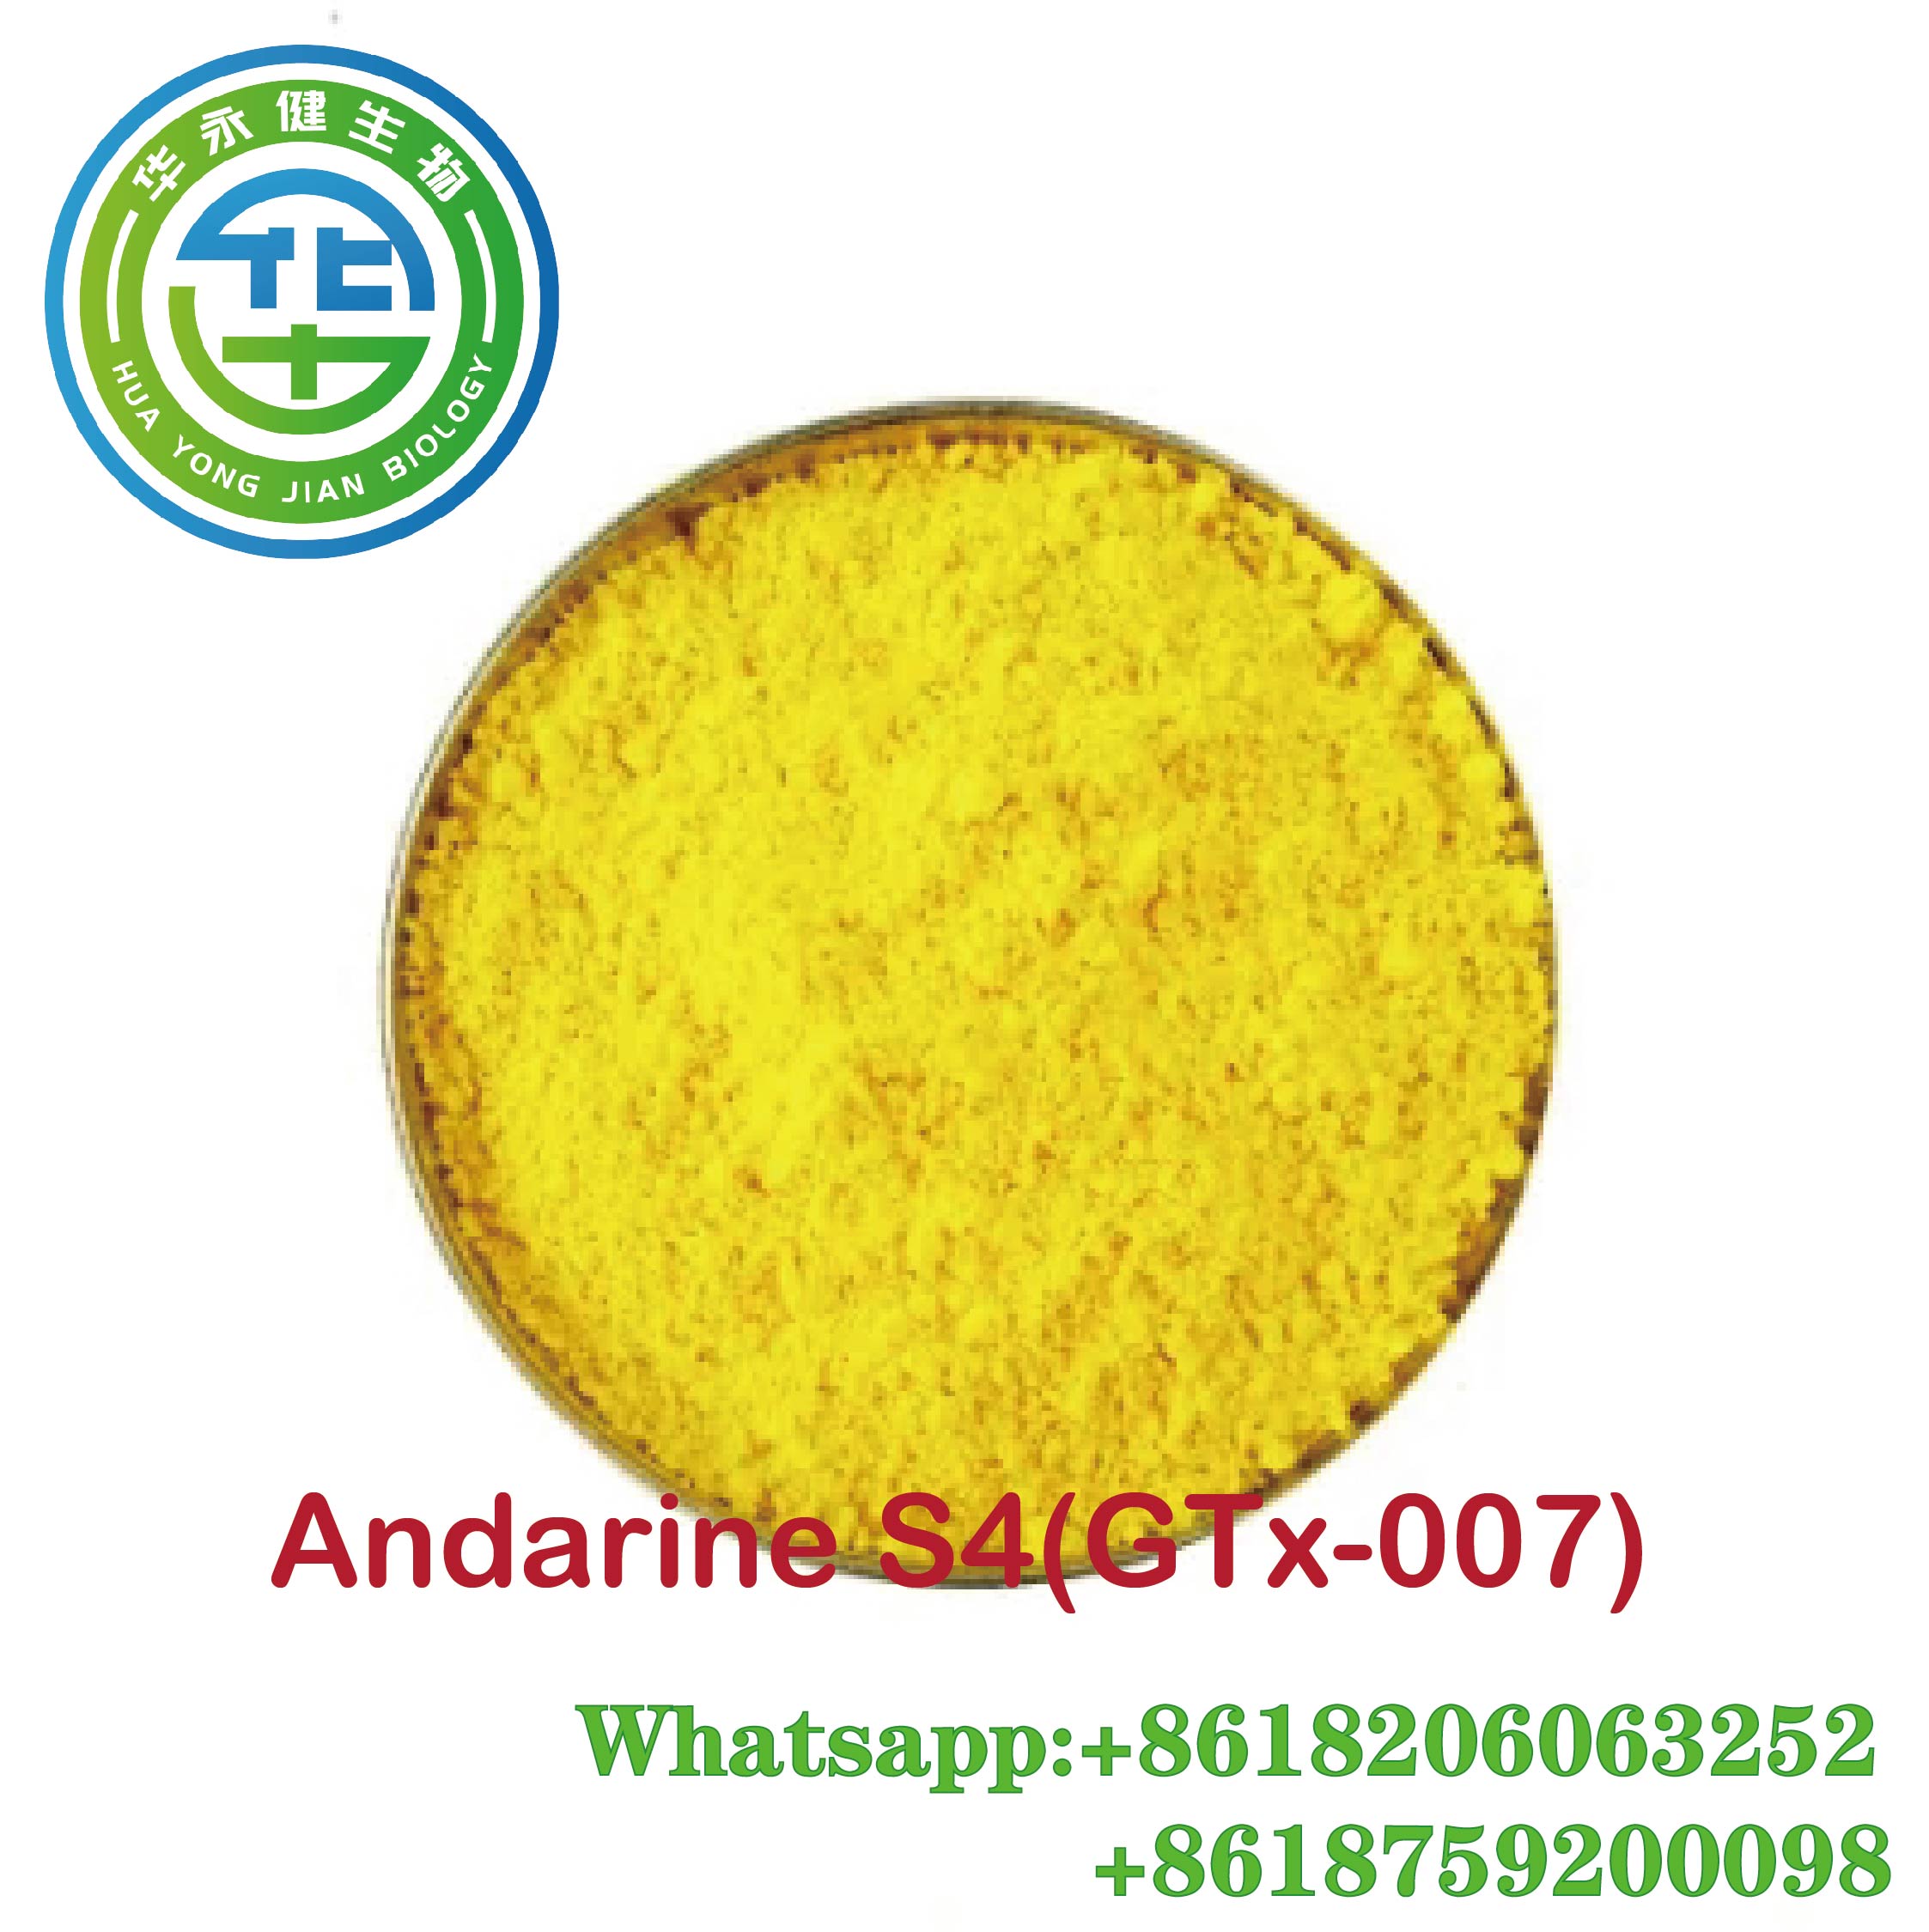 Effective legal Sarms Andarine/S4 Raw Powder for Bodybuilder Cutting Cycle CAS: 401900-40-1 